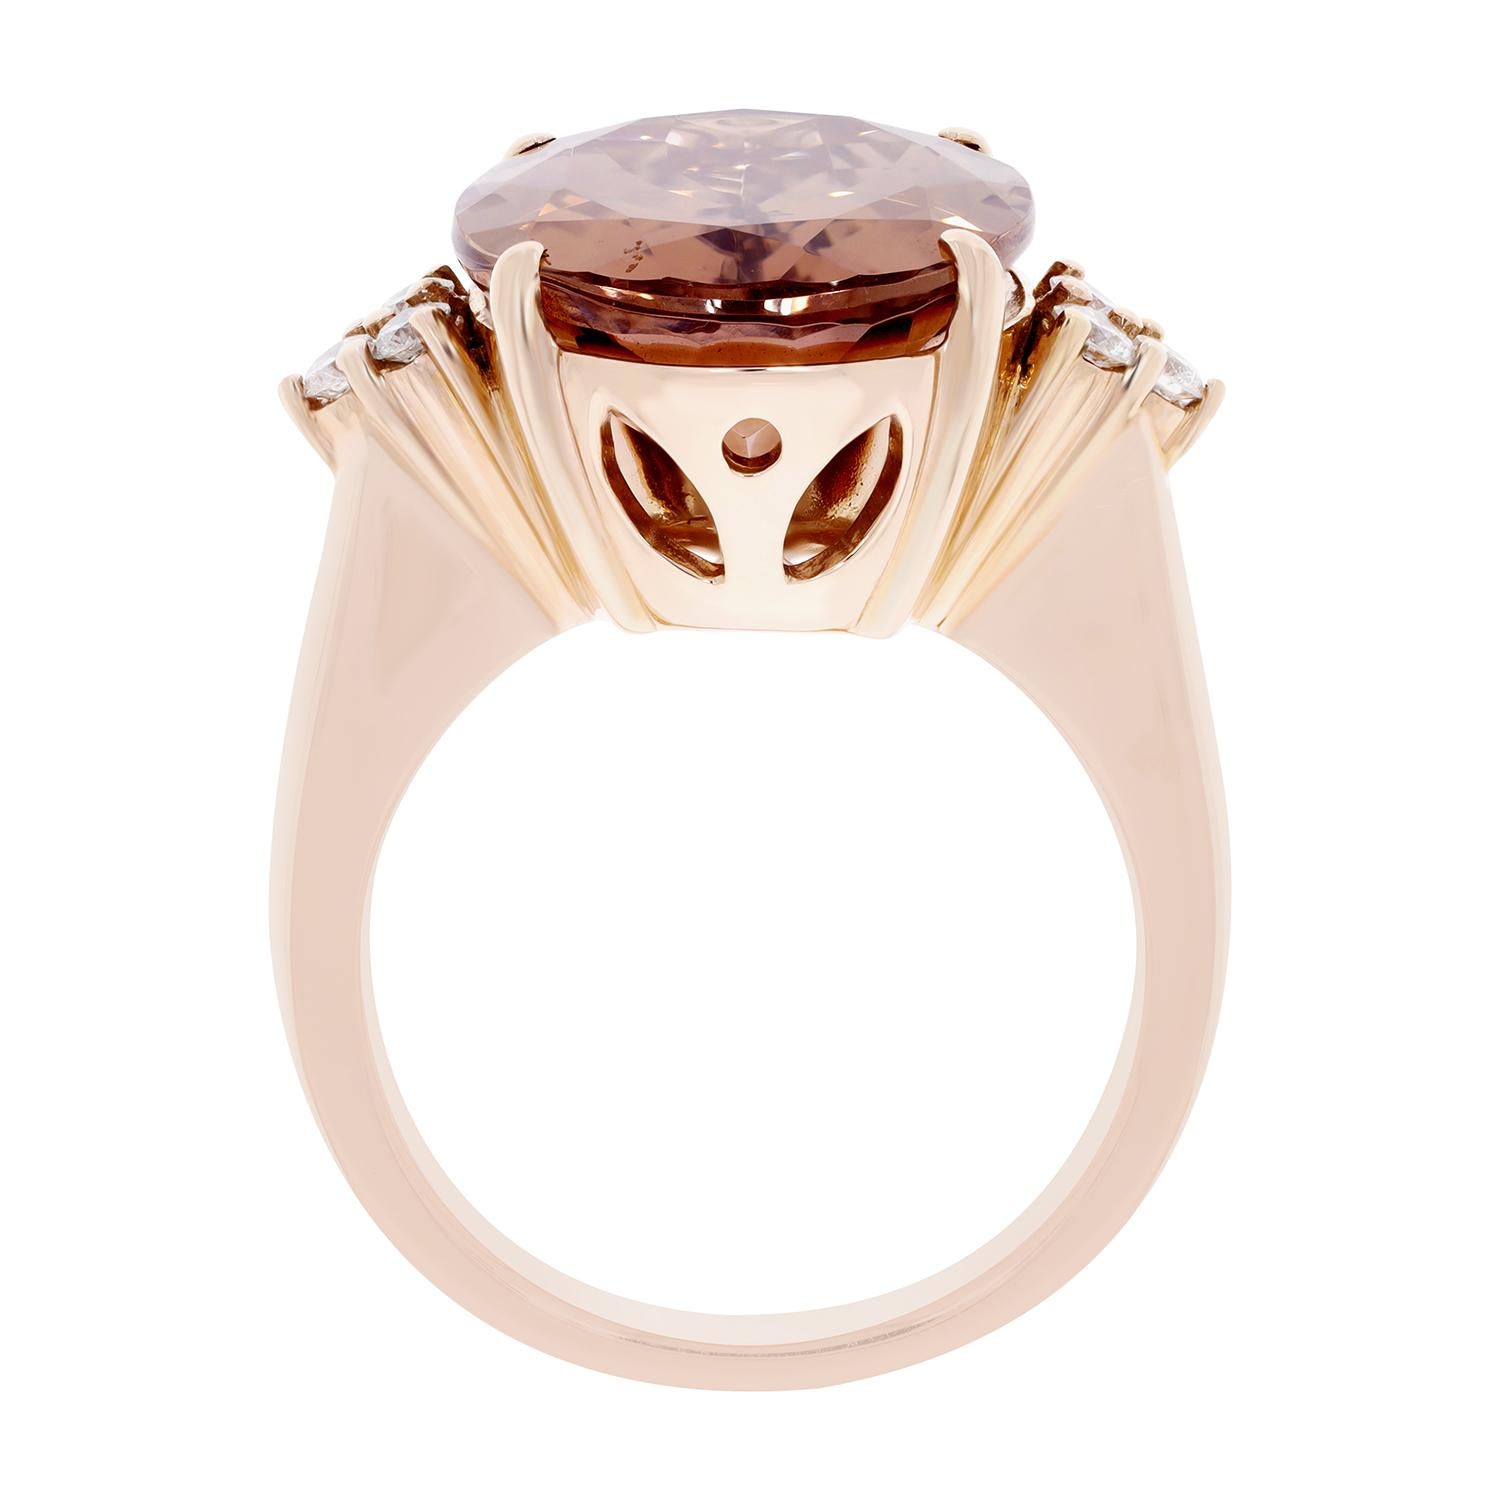 This luxury style ring is an instant style boost that gels well with every style outfit. The admirable part is its eye-catching design that showcases oval-cut pink Zircon and round Diamonds in 14kt rose gold.